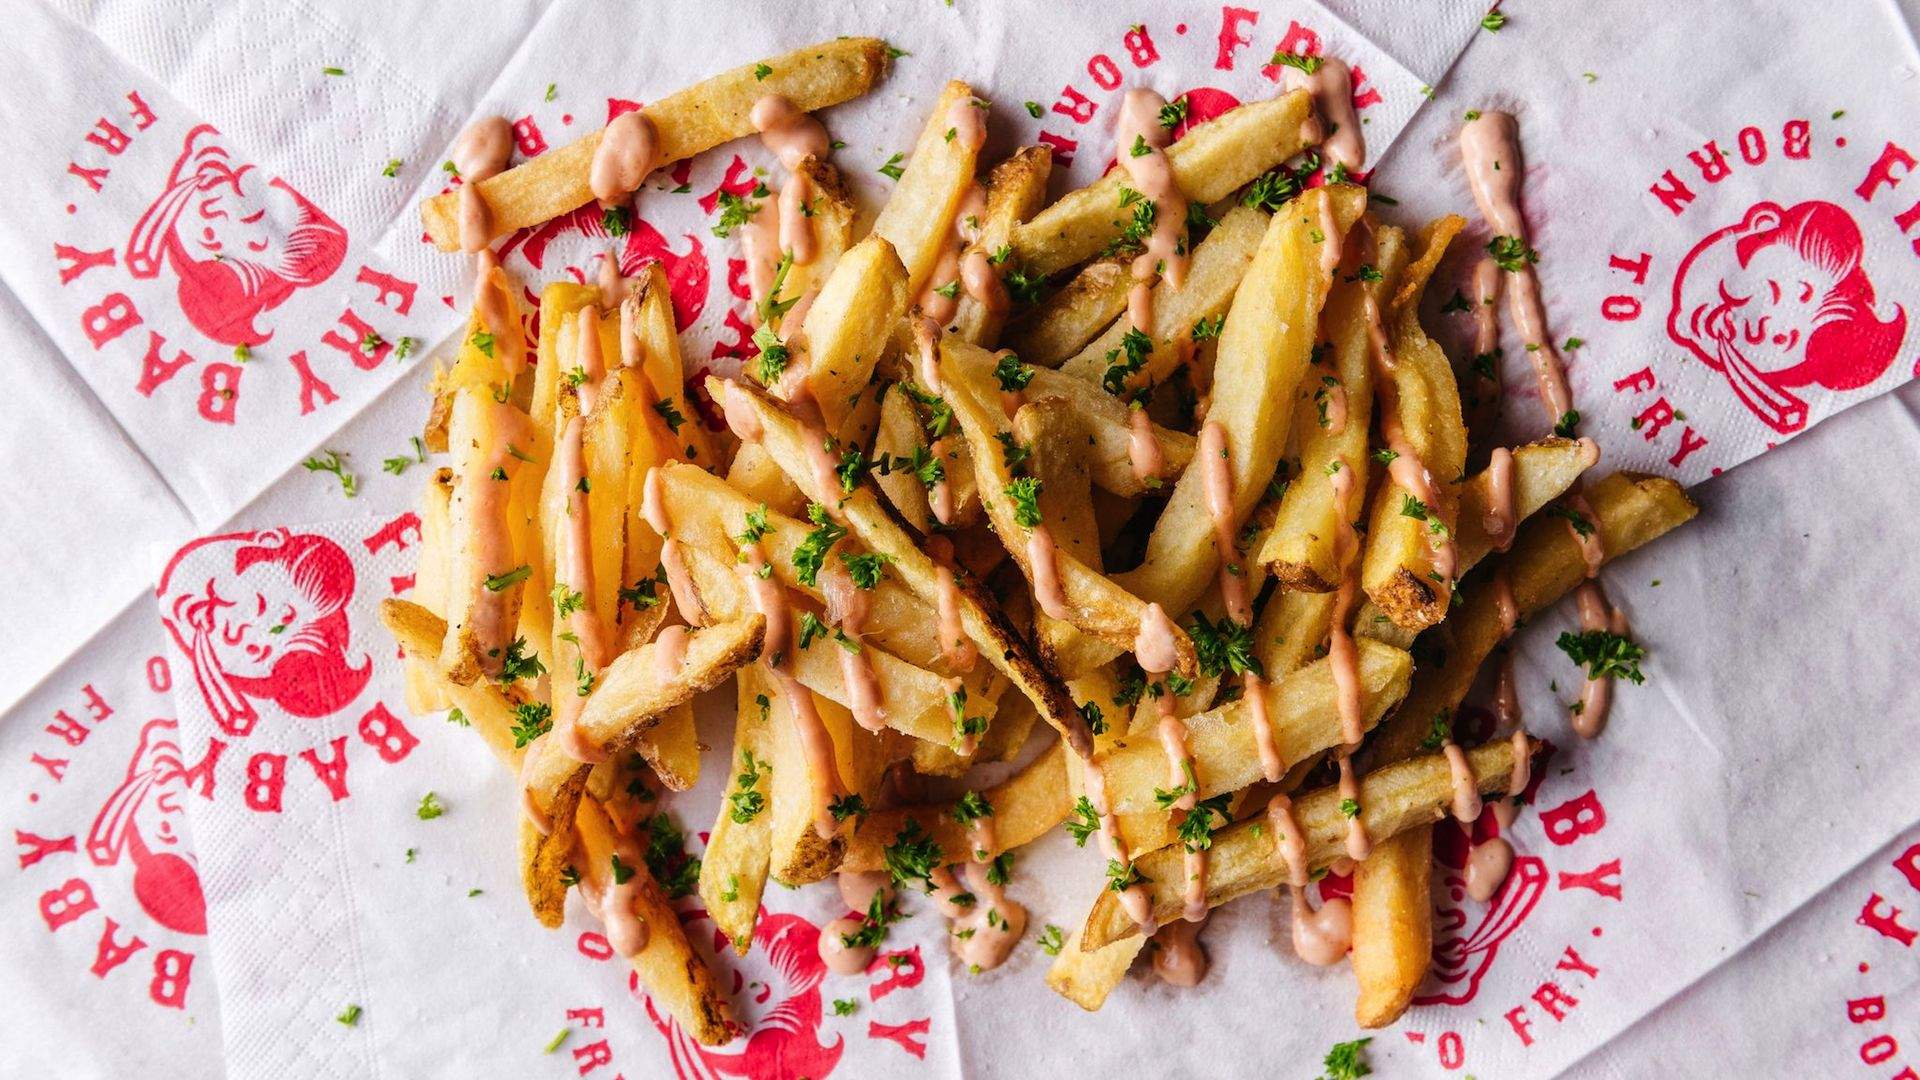 An Eatery Dedicated to Belgian Frites Is Opening in the CBD